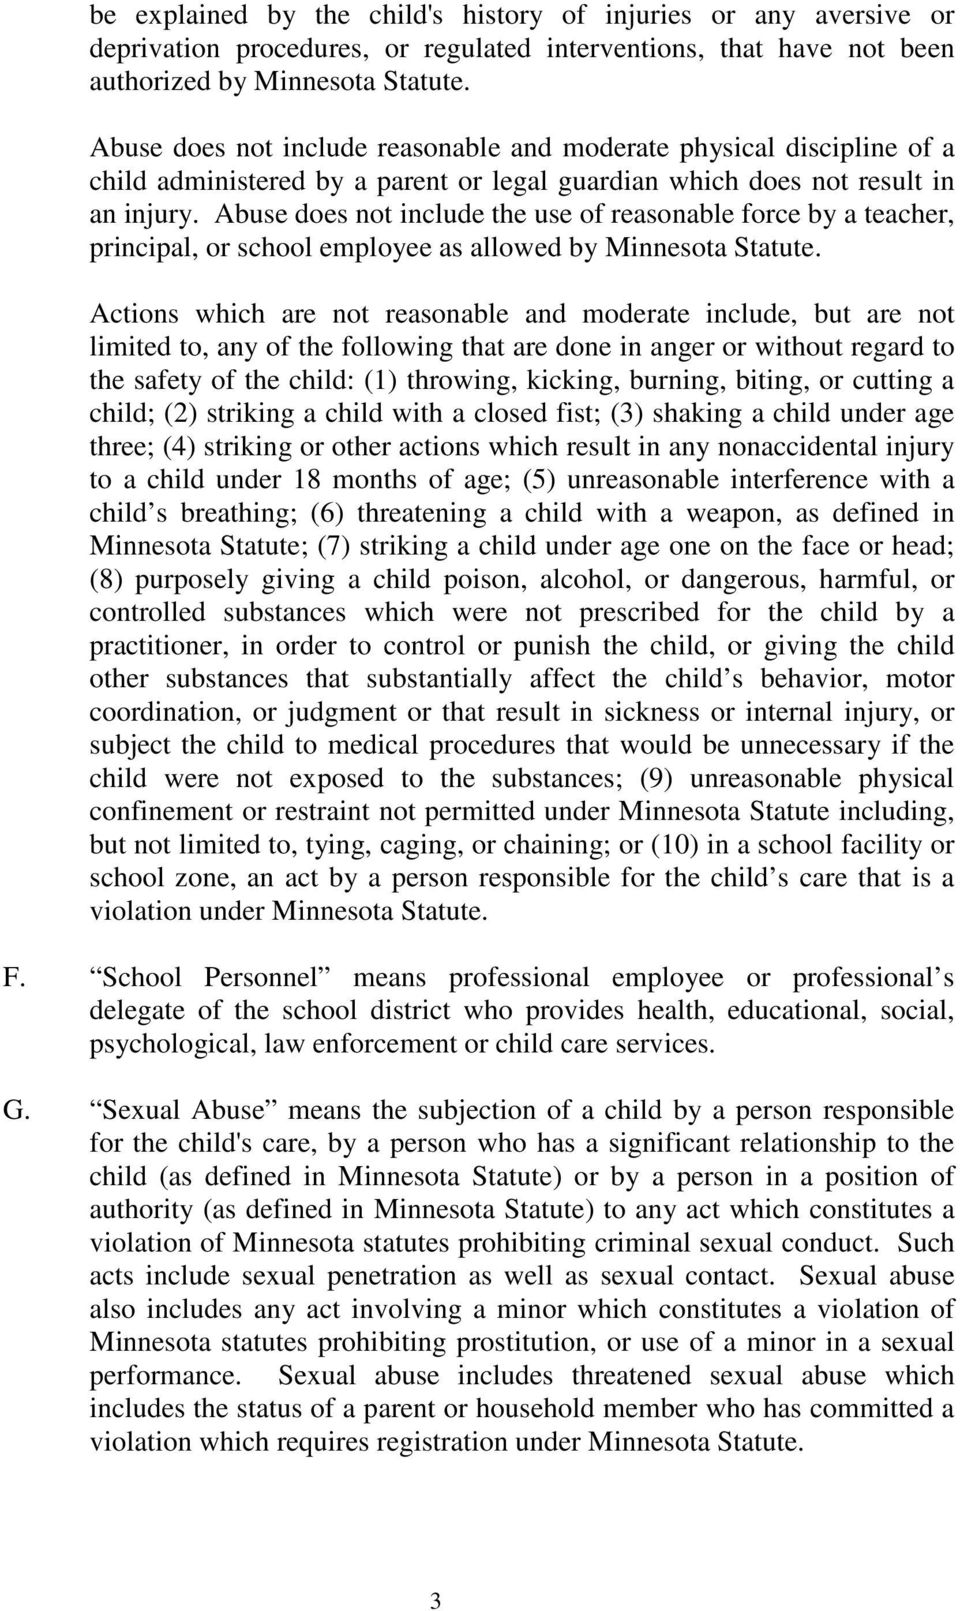 Abuse does not include the use of reasonable force by a teacher, principal, or school employee as allowed by Minnesota Statute.